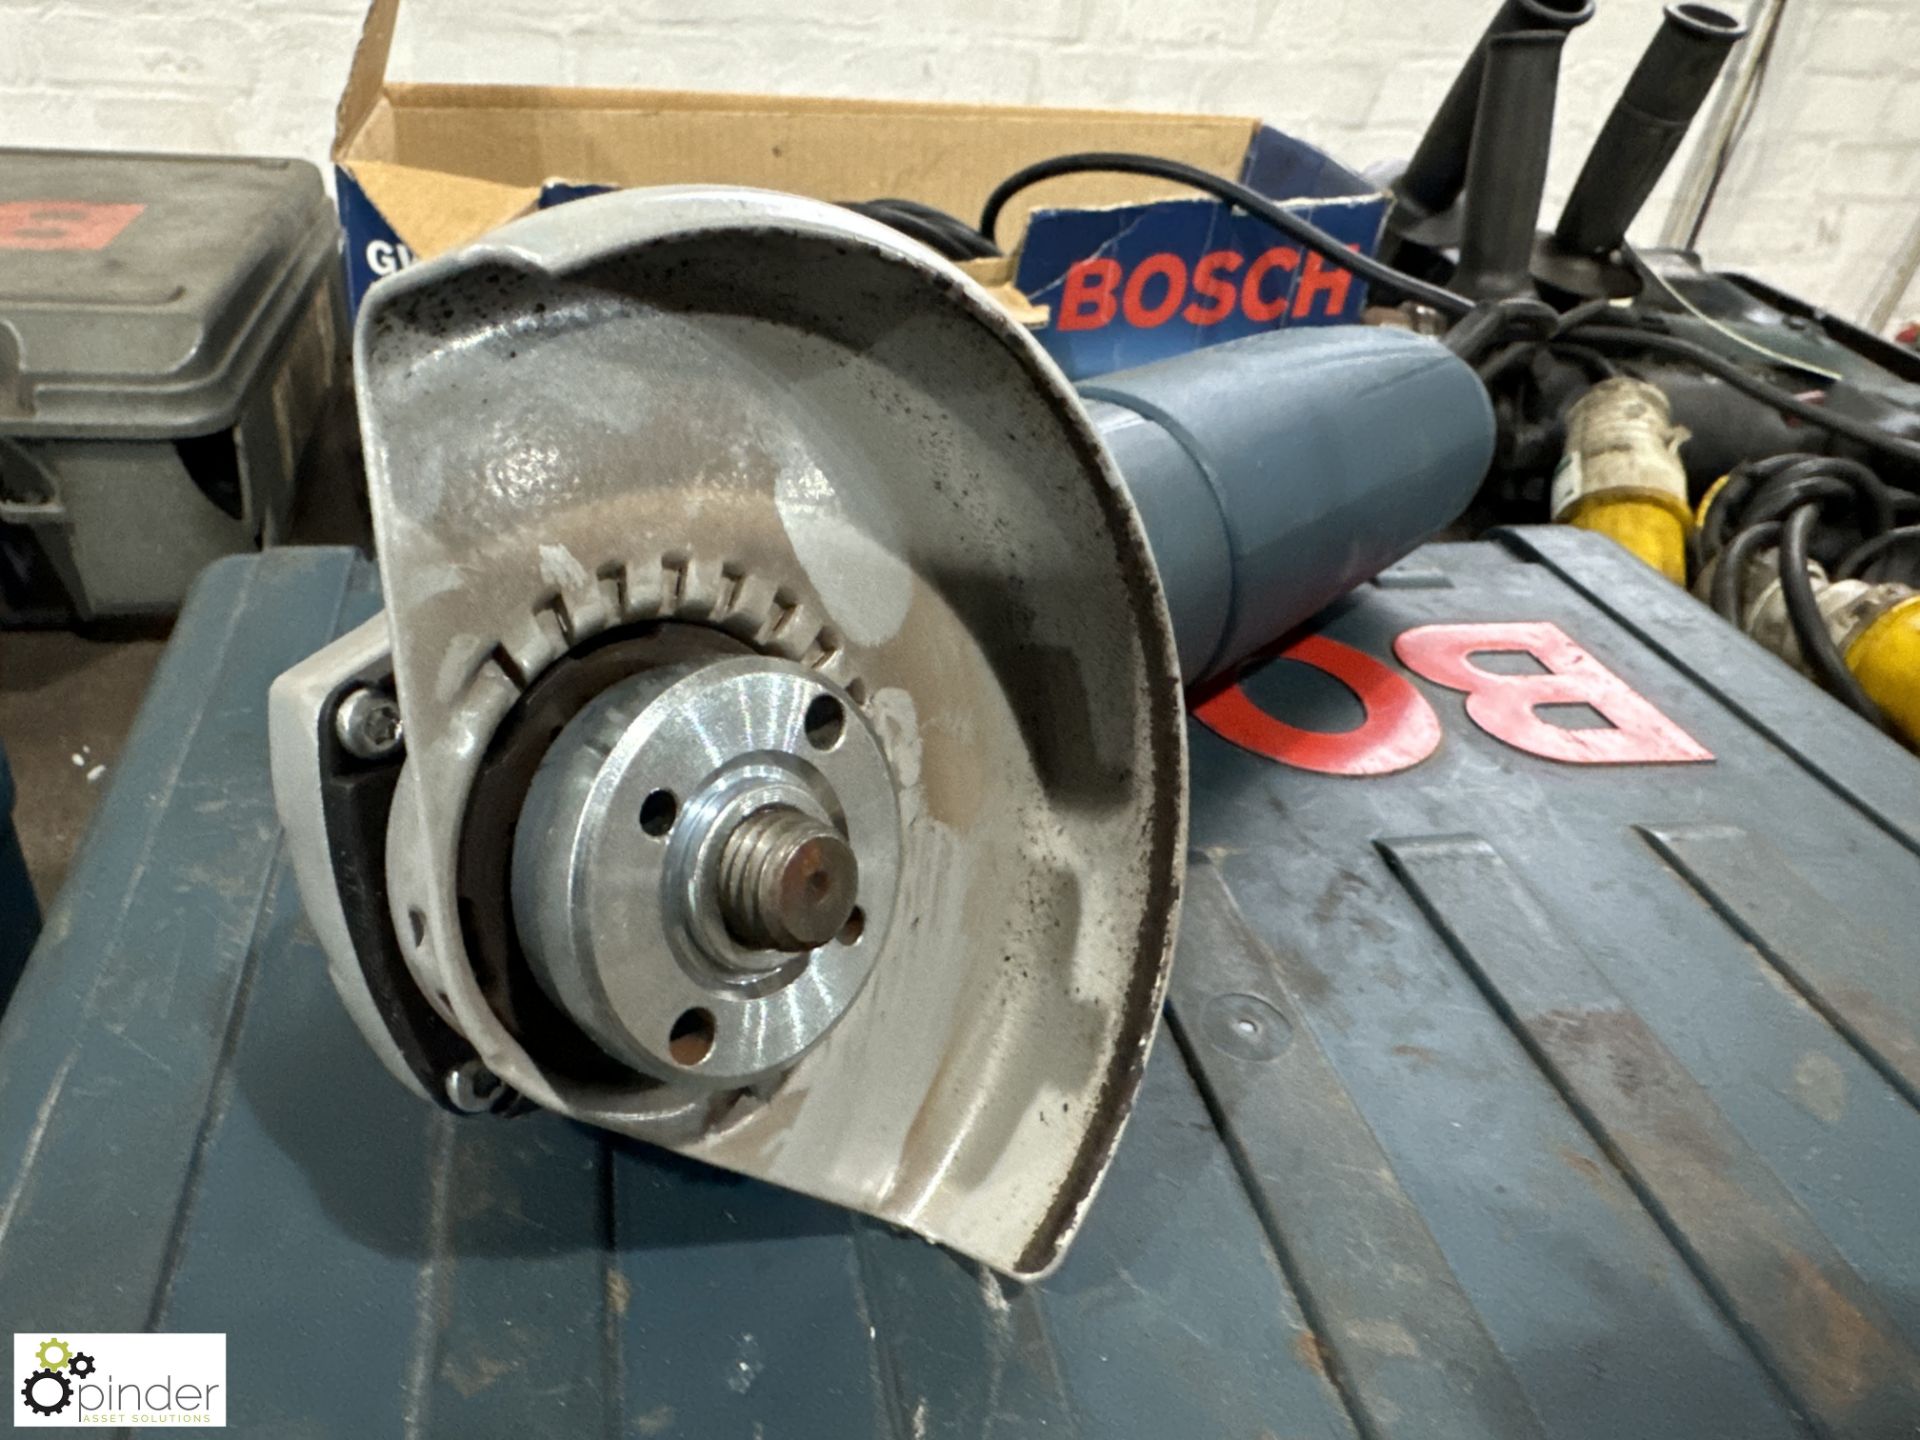 Bosch GWS9-115 Angle Grinder, 240volts, boxed - Image 2 of 4